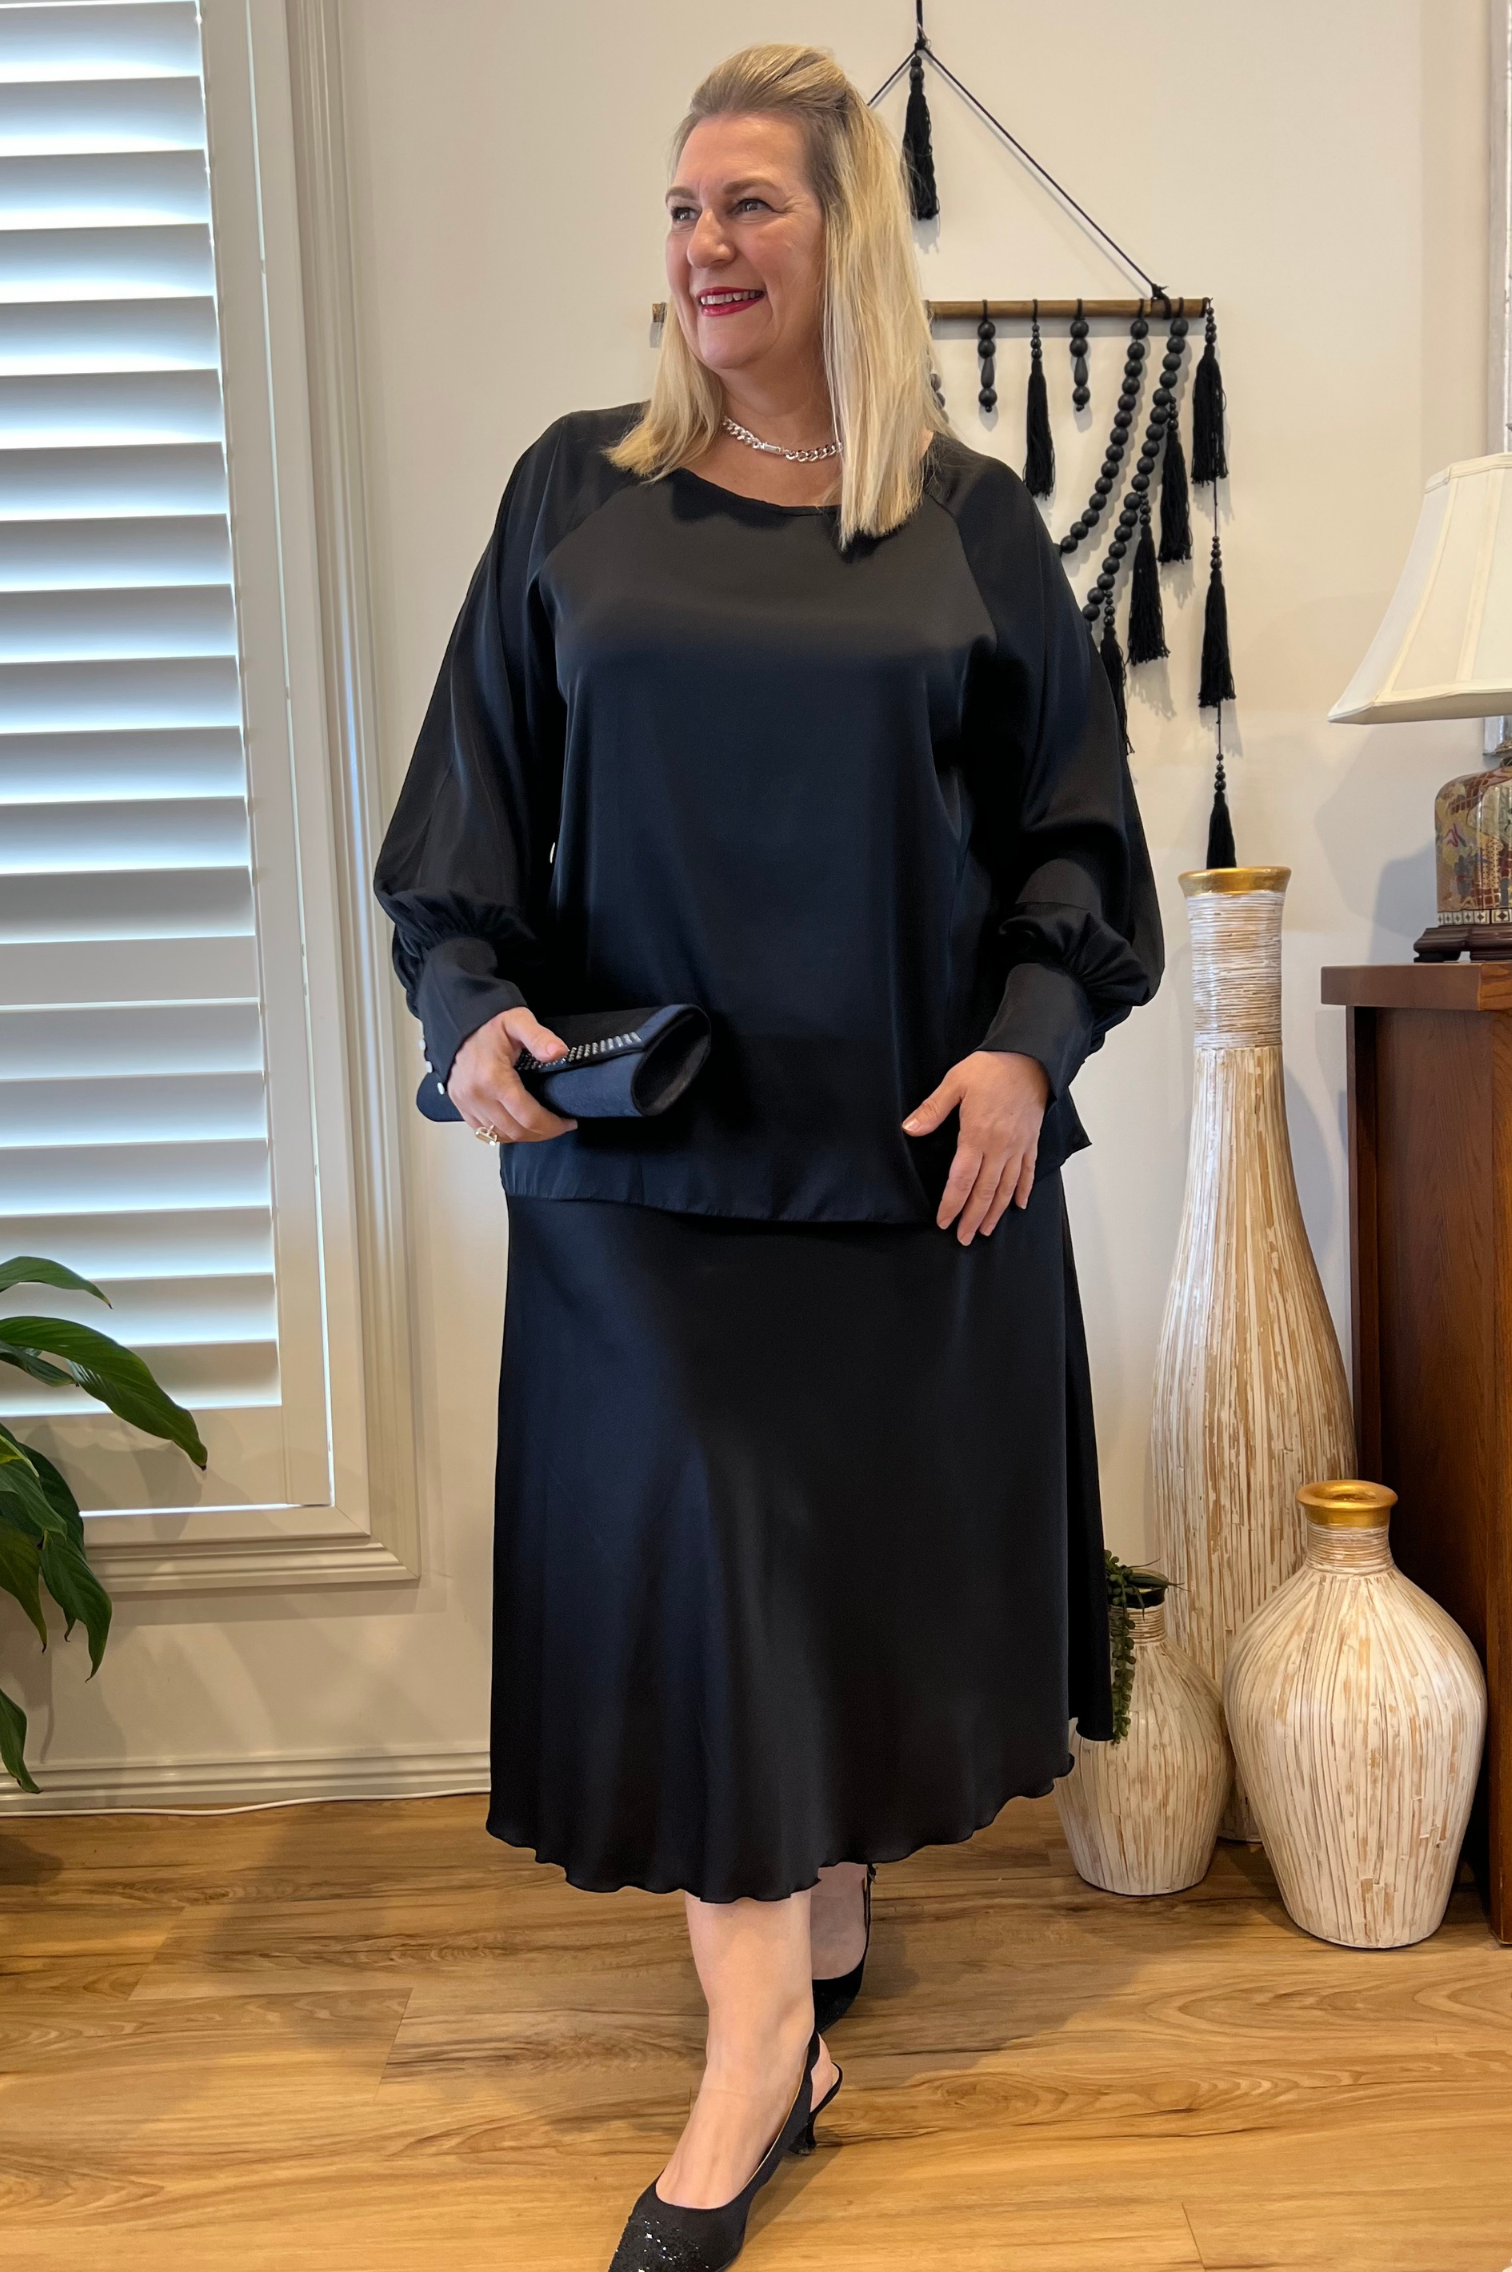 Kita Ku model wearing a black satin skirt and a matching long sleeve blouse with  a full sleeve on a long band.